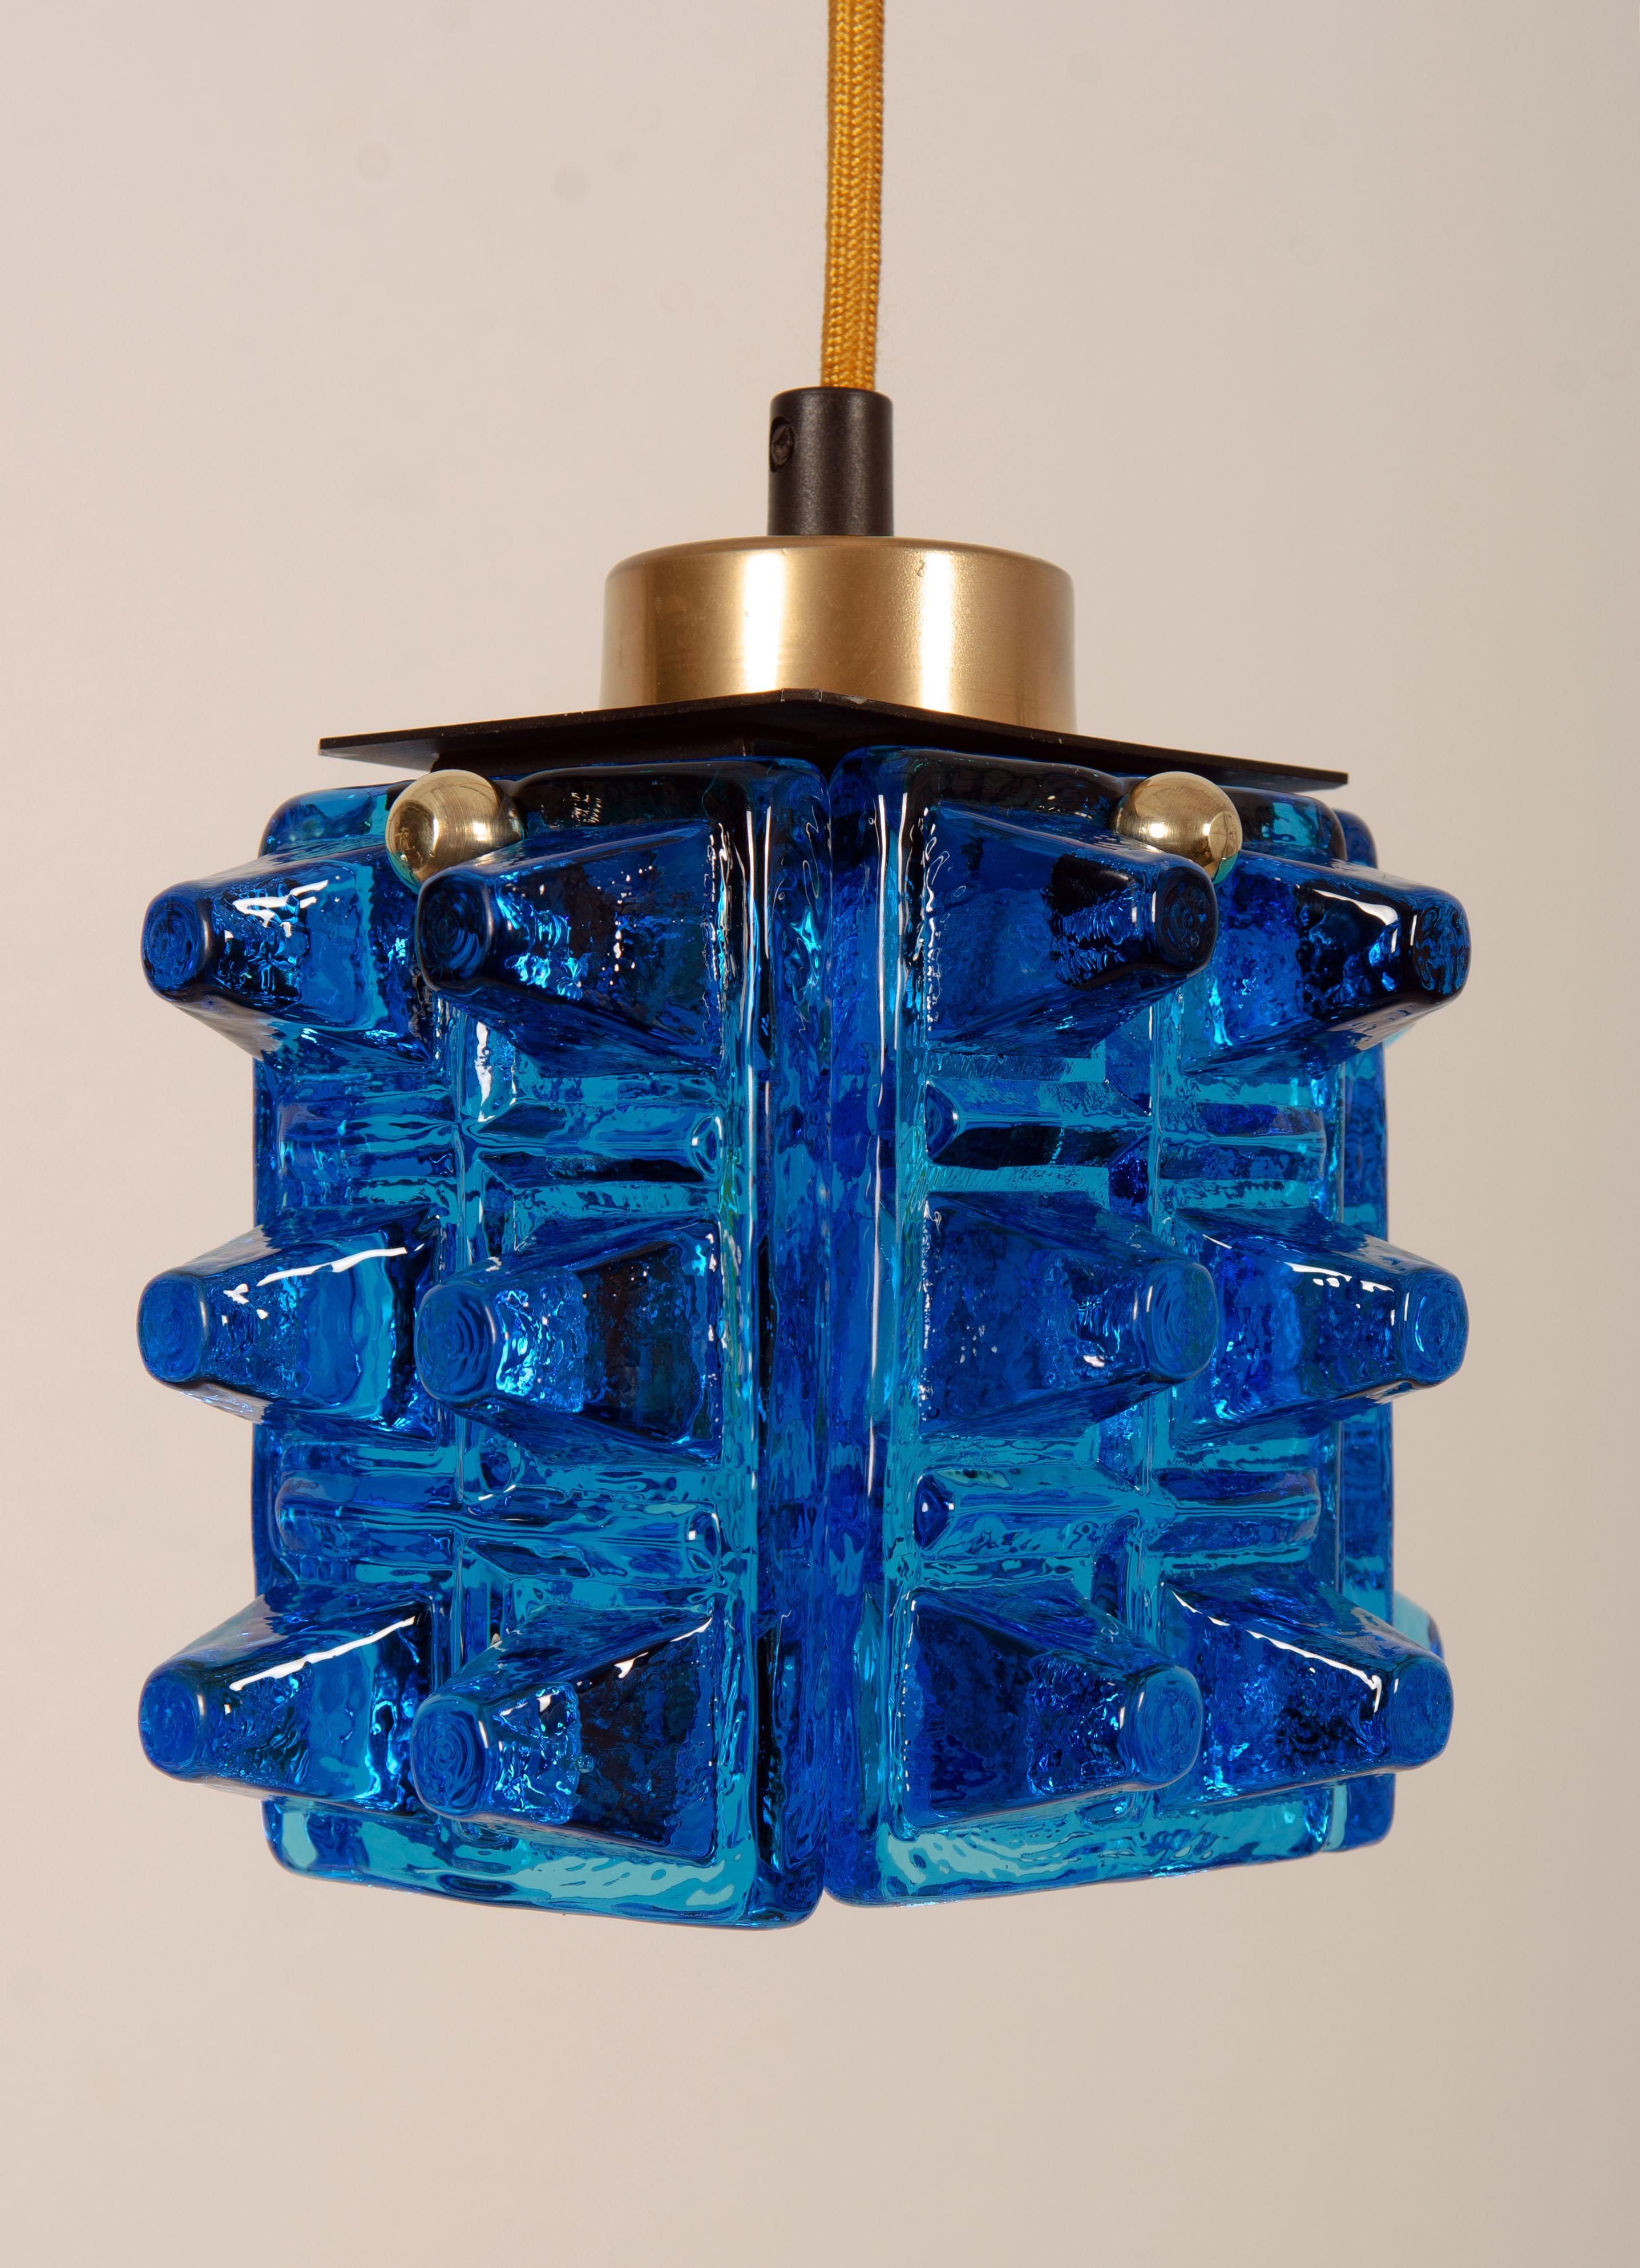 Painted steel frame fitted with one E14 sockets up to 100watts, 4 blue art glass elements. Made in Sweden, Urshult by Ateljé Engberg in the early 1970s. Up to 3 pieces available price per lamp.